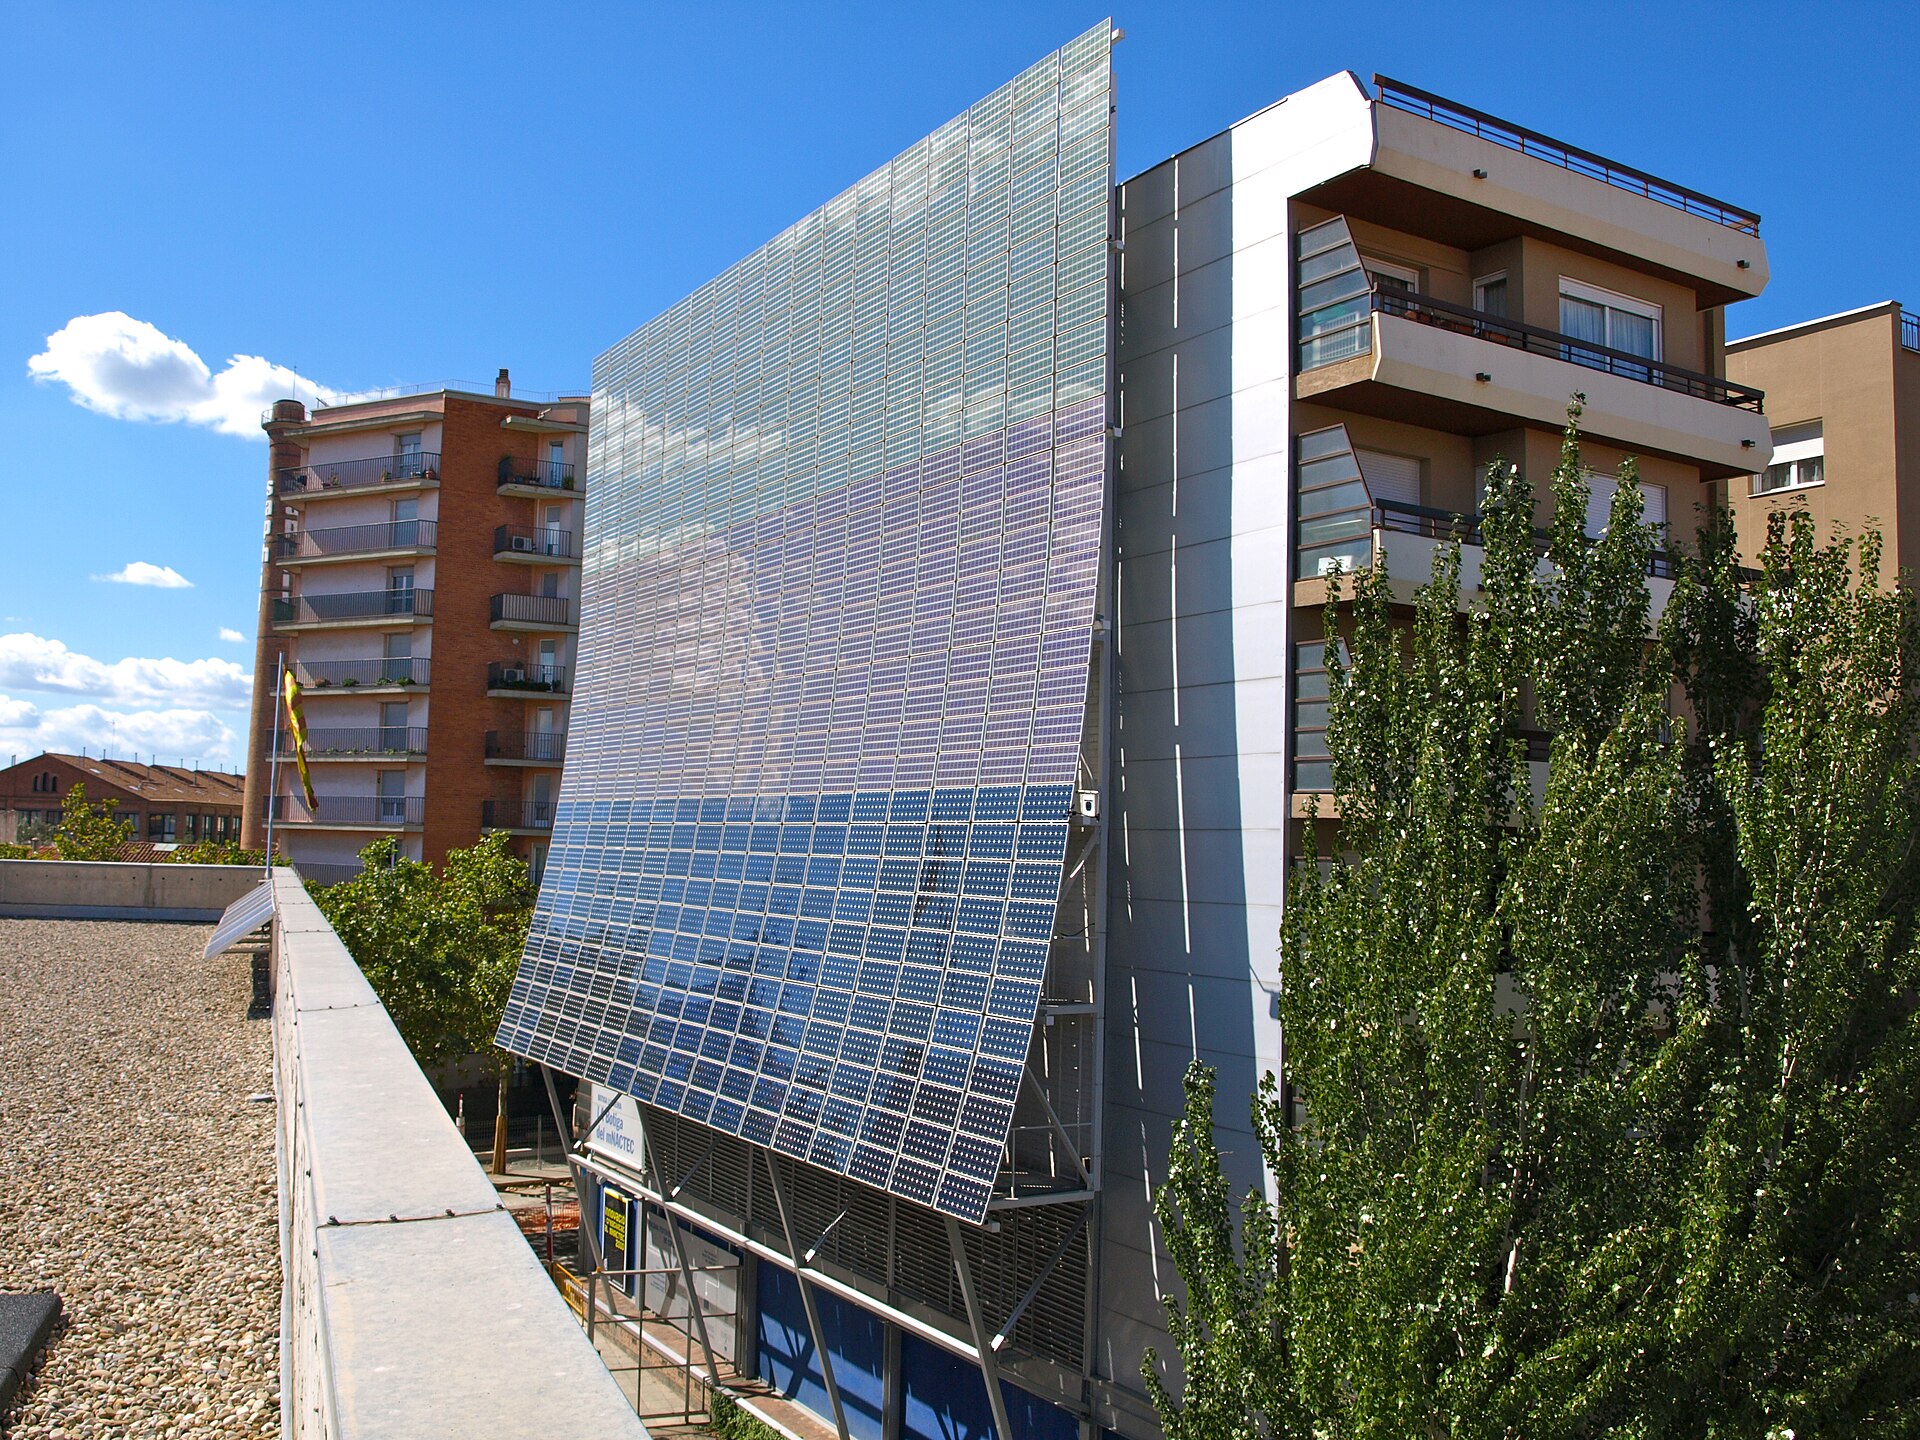 A Photovoltaic installation in Spain